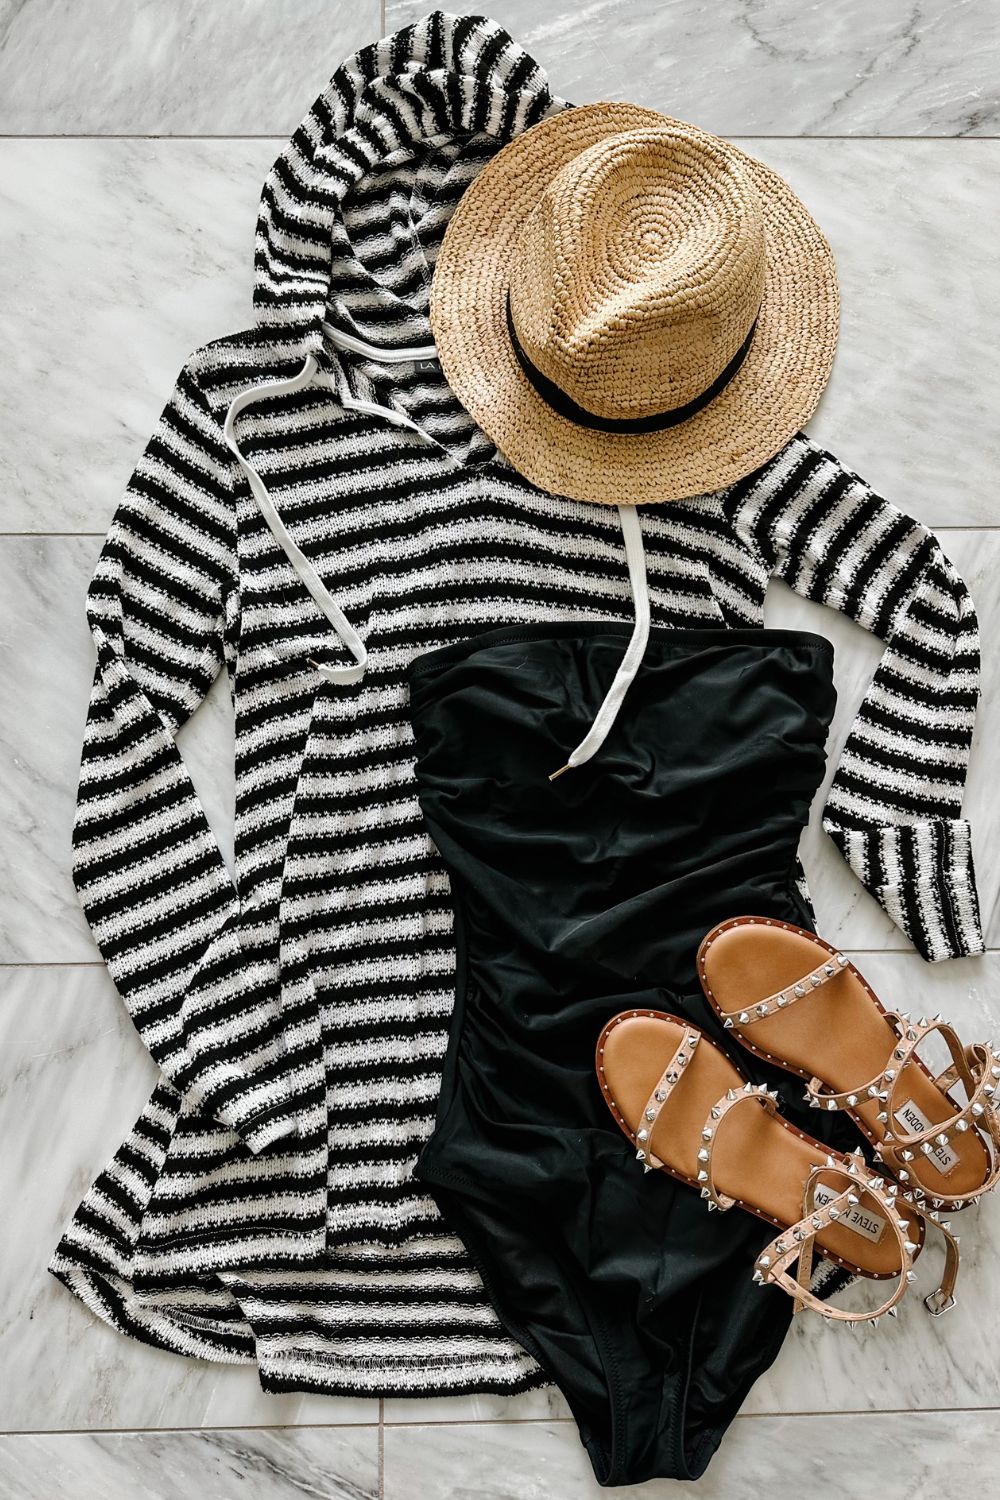 An outfit idea for the pool or beach: striped cover up, one piece suit, straw hat